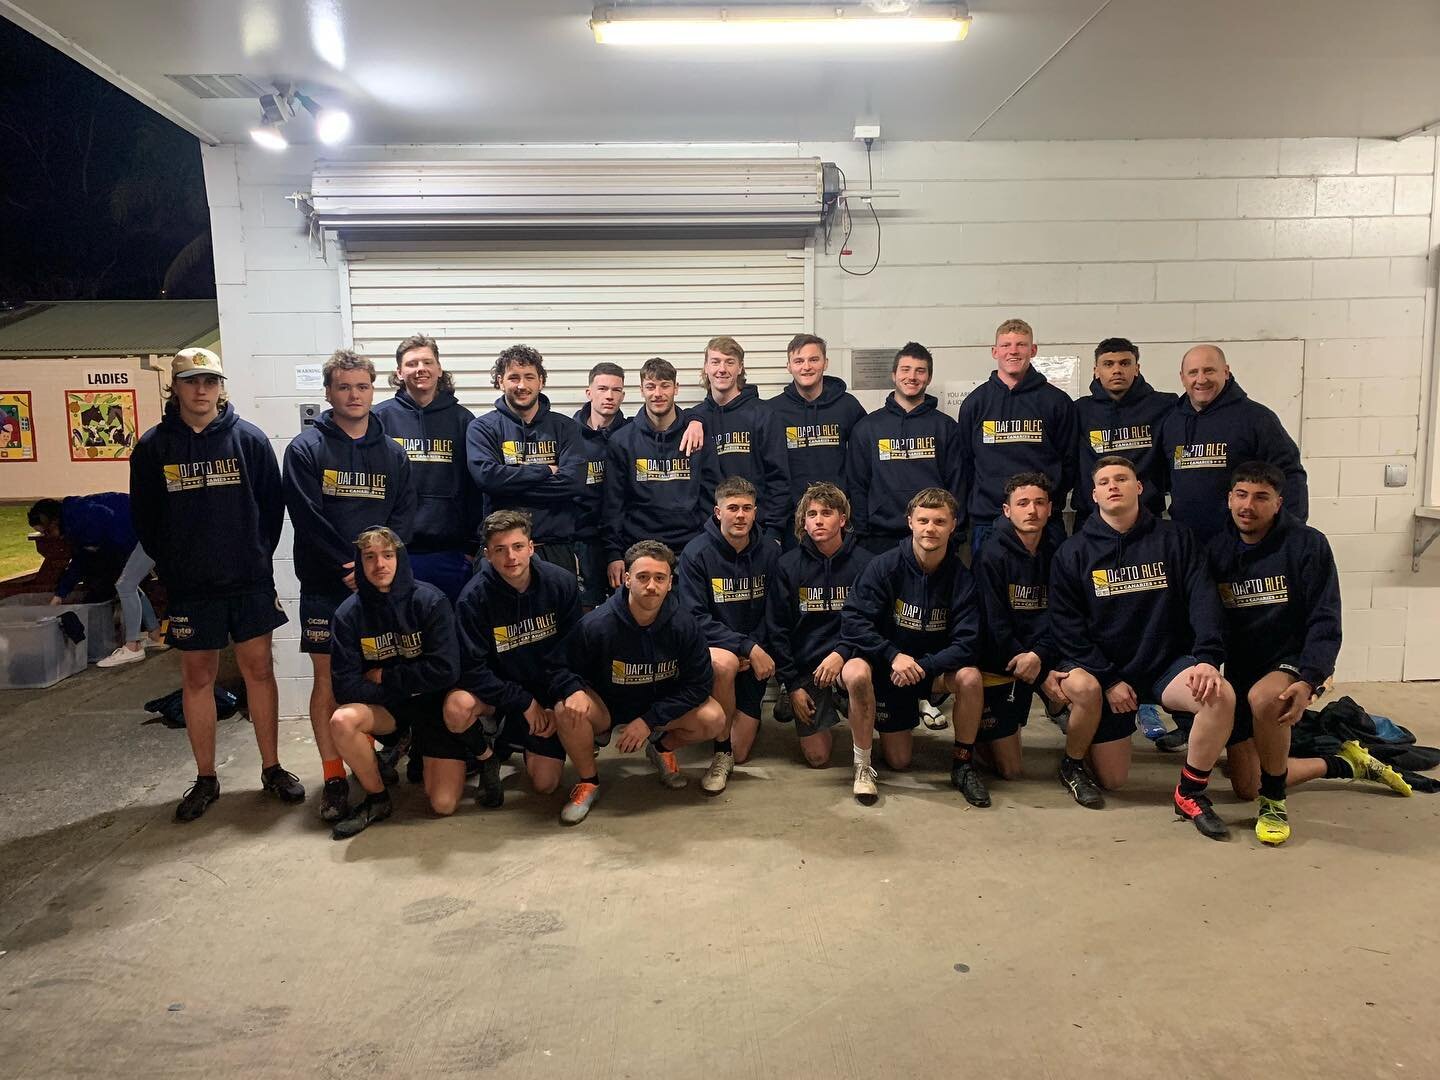 YTB! 🐤🏉 congrats to the Under 18s on their 24-18 W today. Grand Final is up next! 🤞